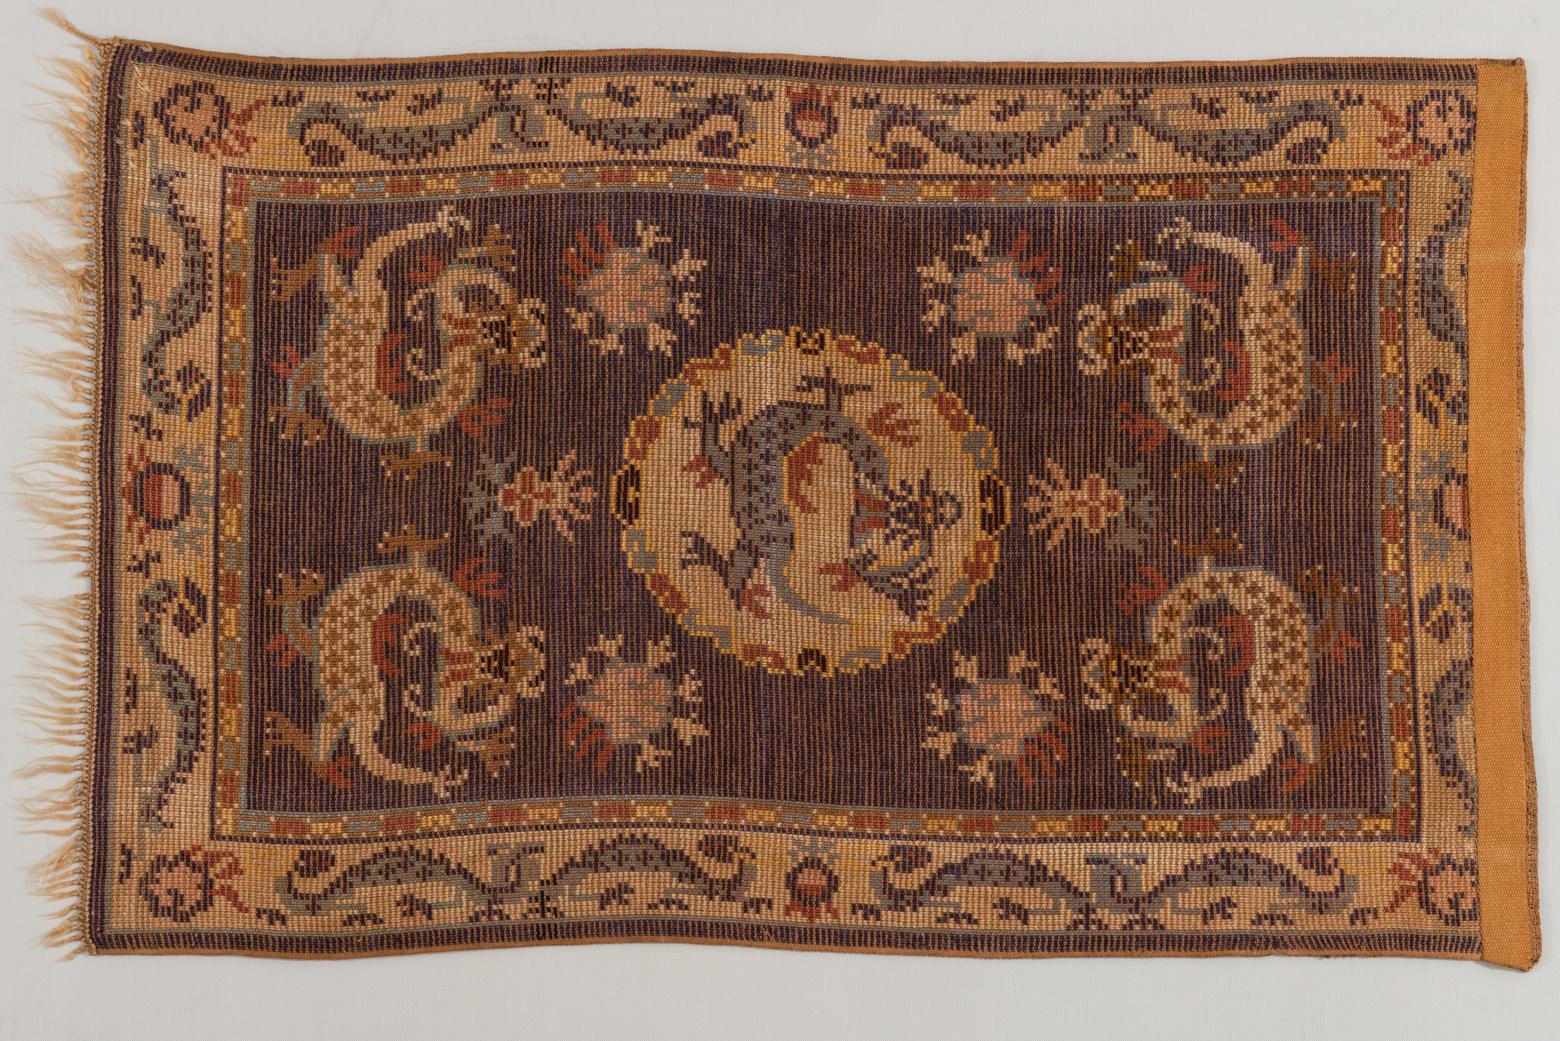 Little pretty antique silk Chinese carpet, suitable for wall for its elegance: already prepared with a tape on the reverse.
Nr. 1183.